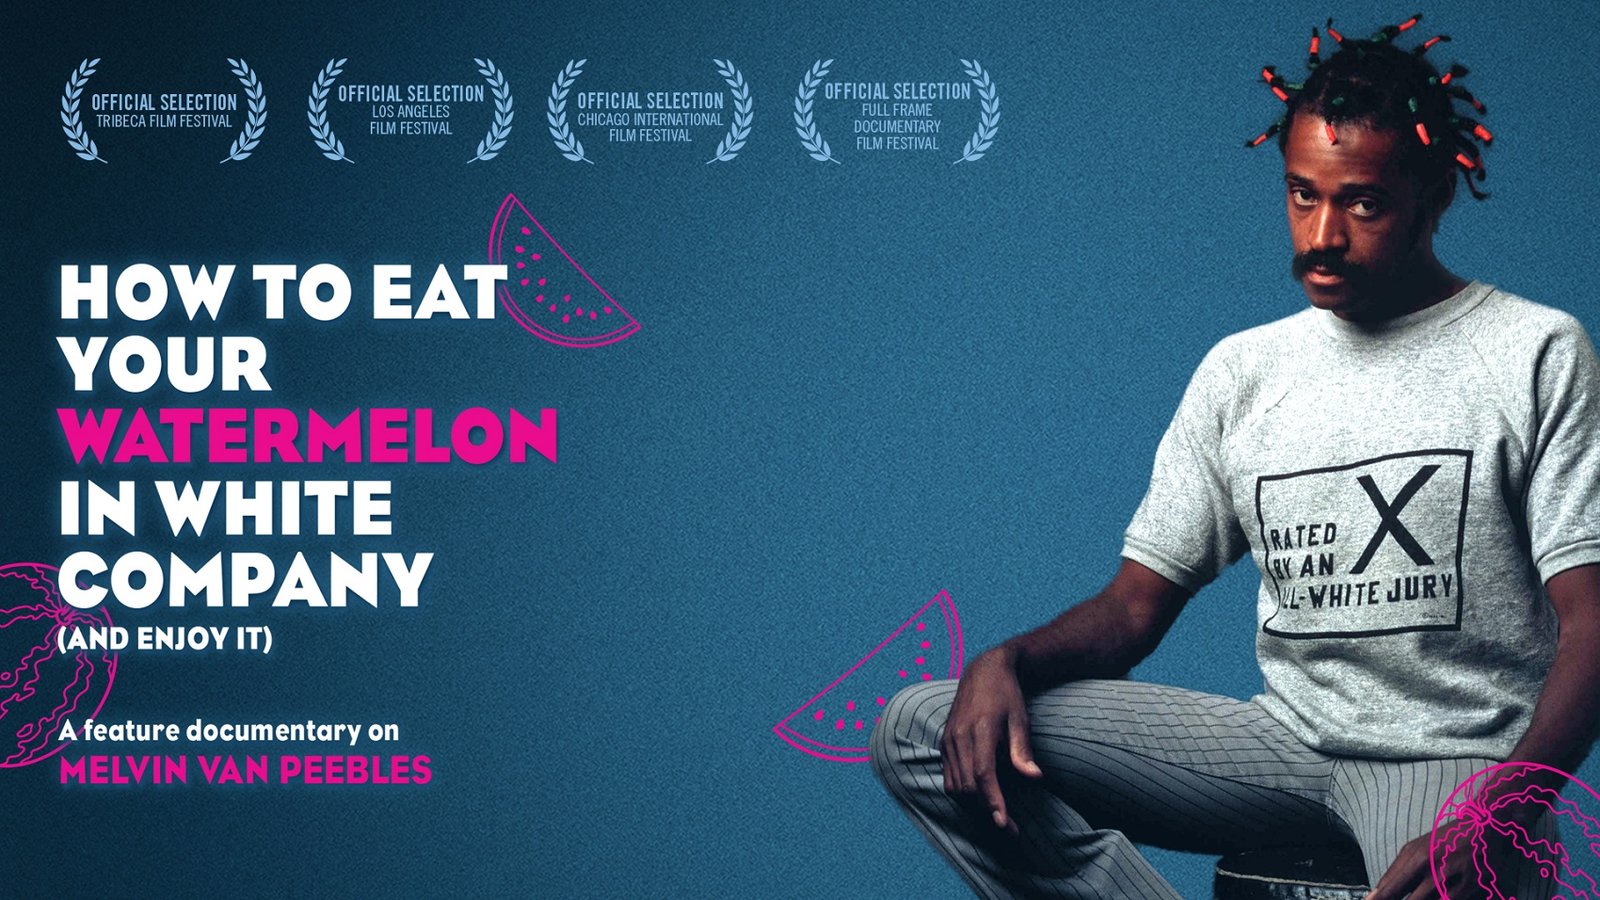 How to Eat Your Watermelon in White Company (and Enjoy It) - Artist Melvin van Peebles